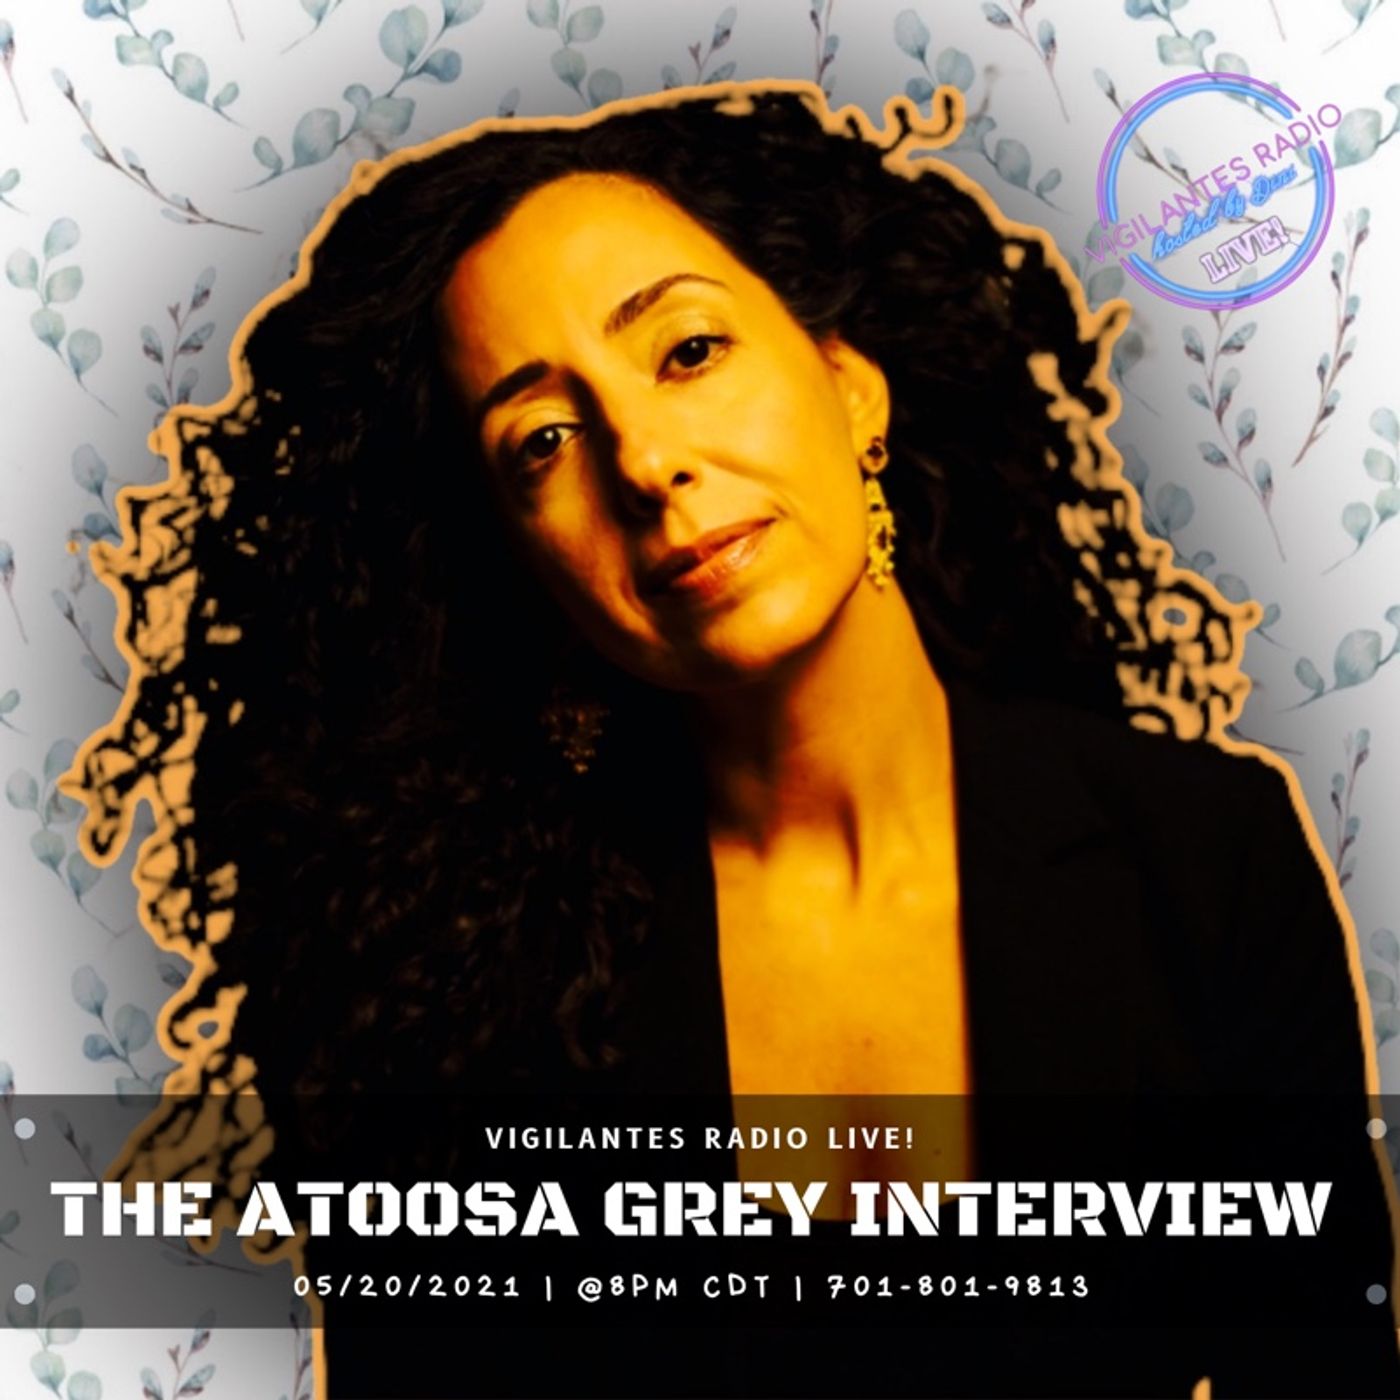 The Atoosa Grey Interview. Image